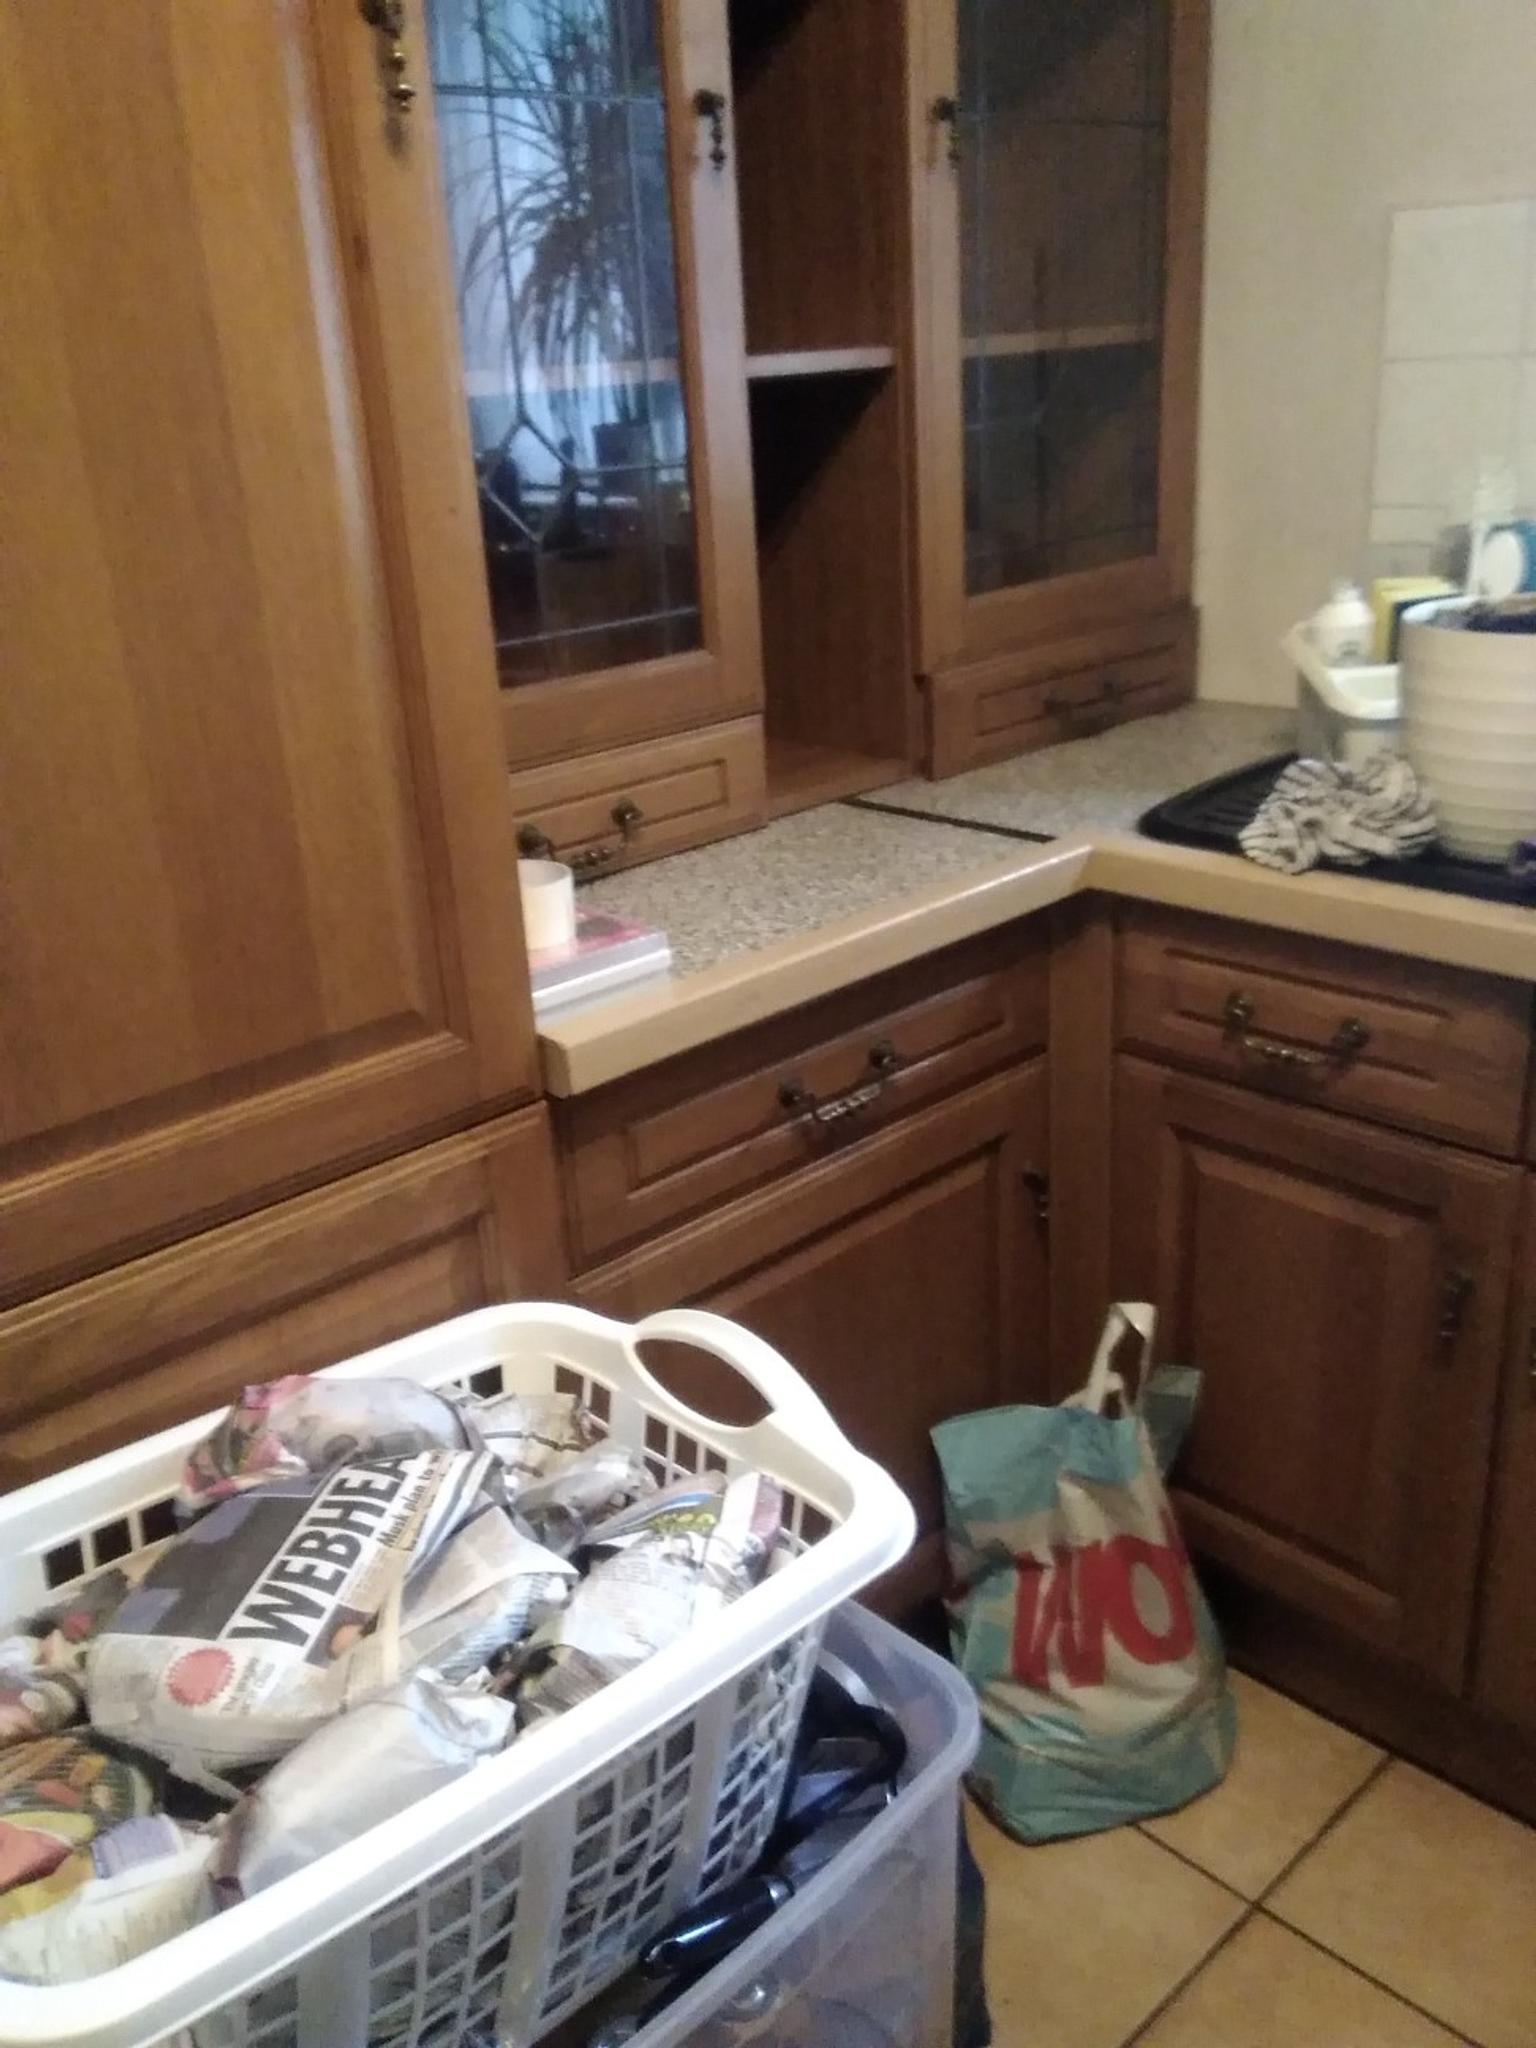 Kitchen Cabinets In Braintree For 175 00 For Sale Shpock